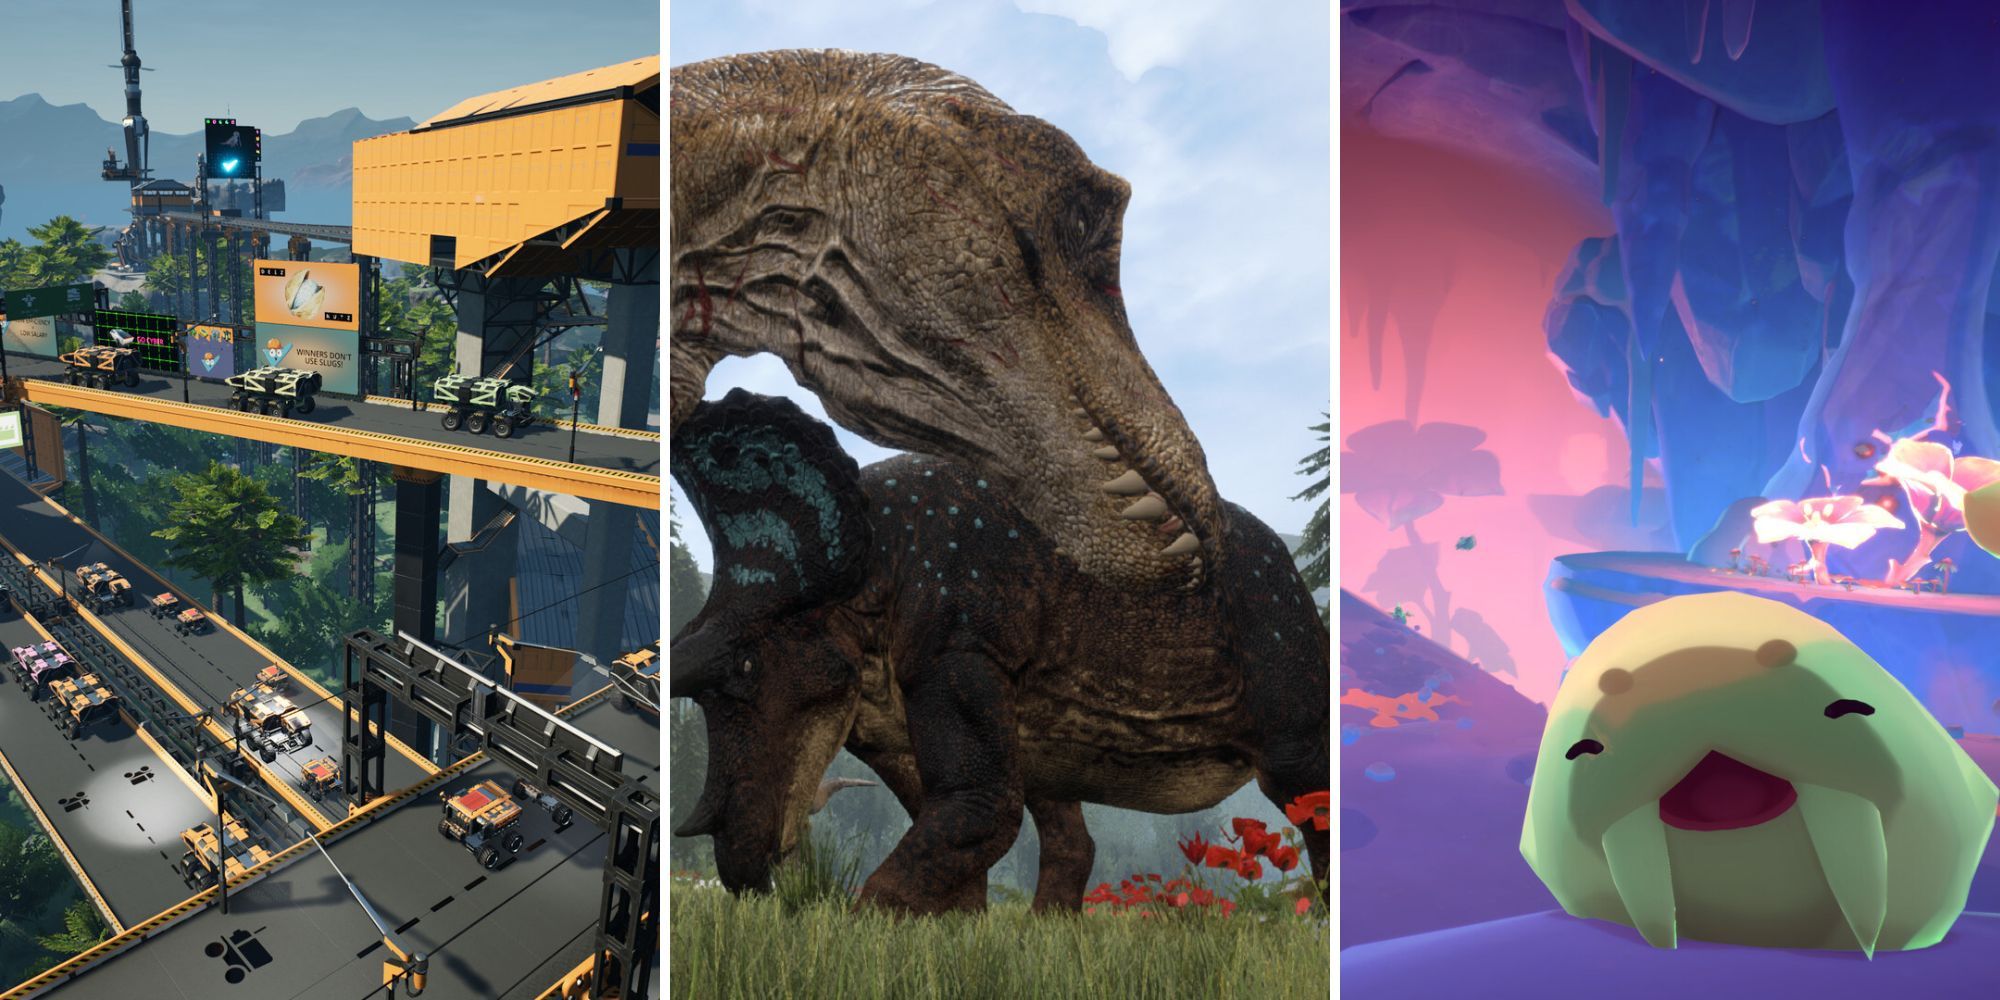 A grid showing the three early access simulation games Satisfactory, The Isle, and Slime Rancher 2